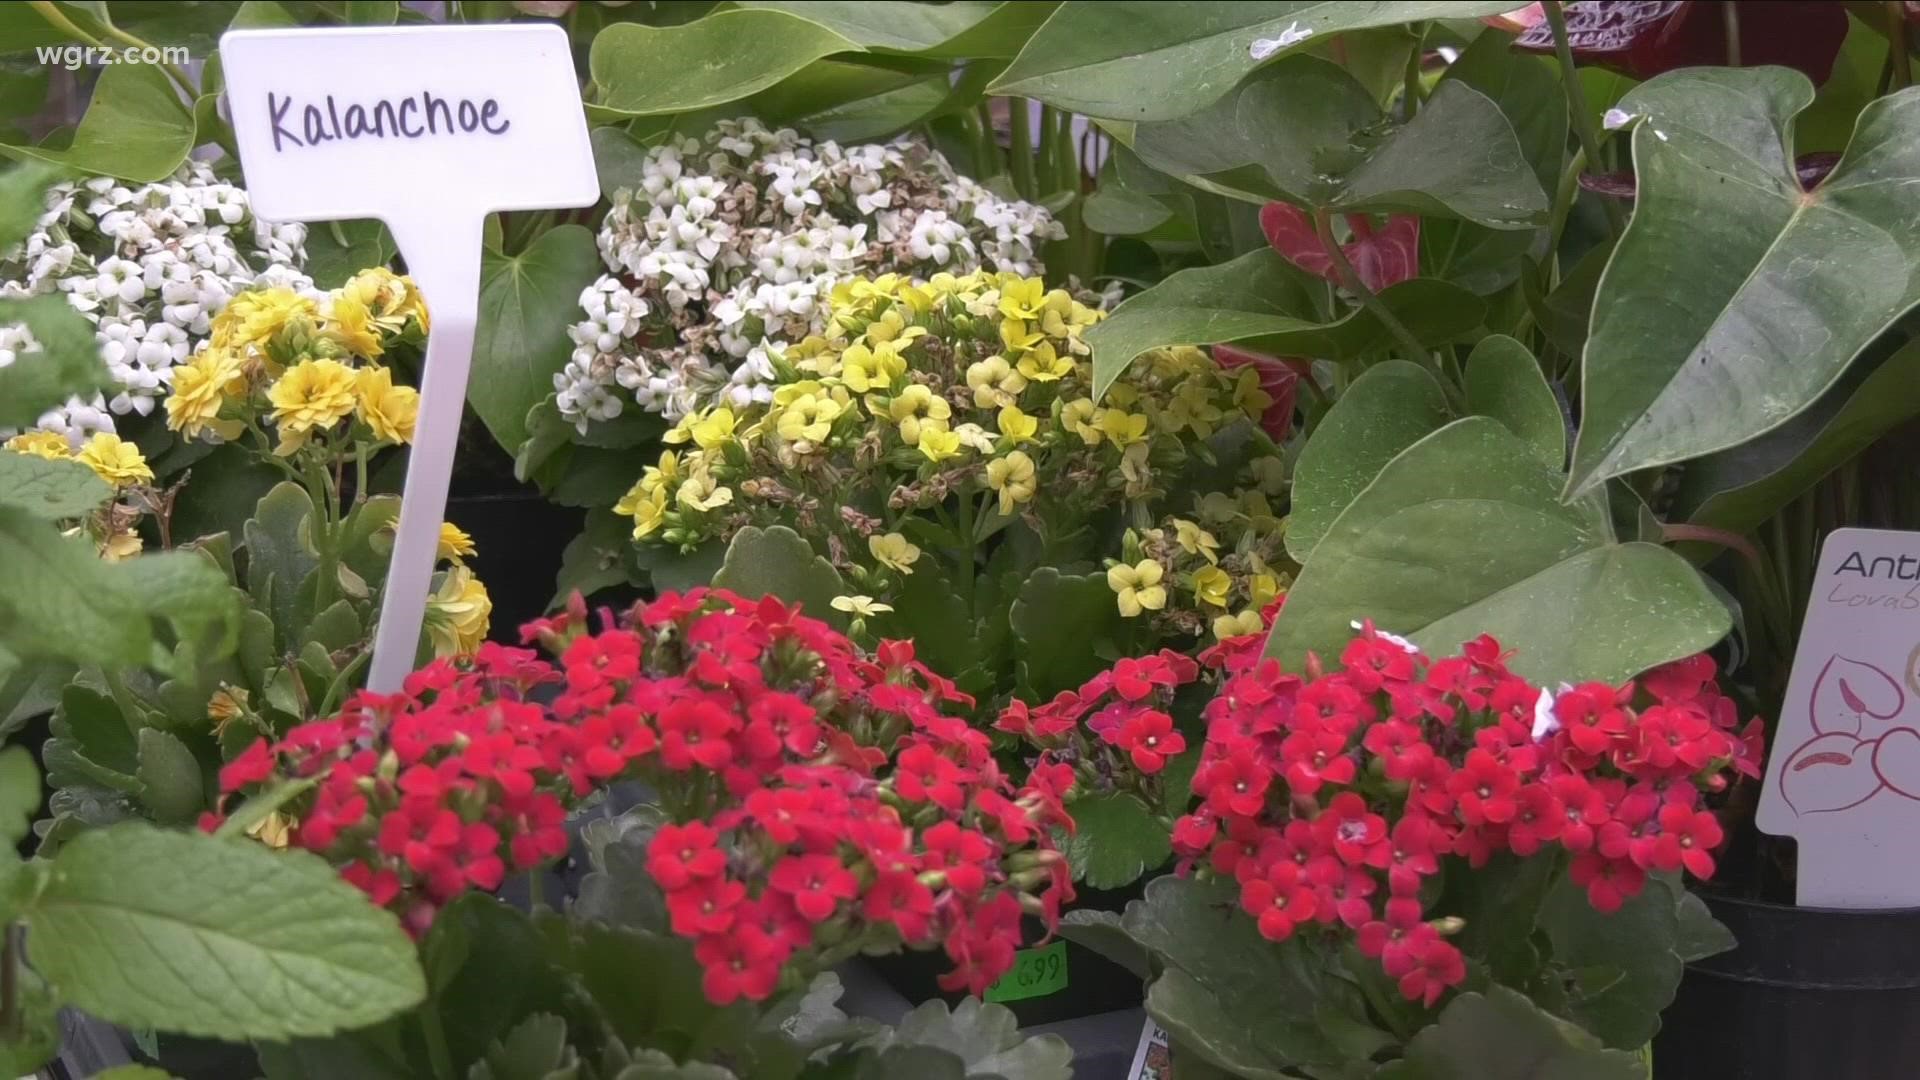 2  The Garden: Jackie Albarella has tips on how to find the perfect plant for your home.